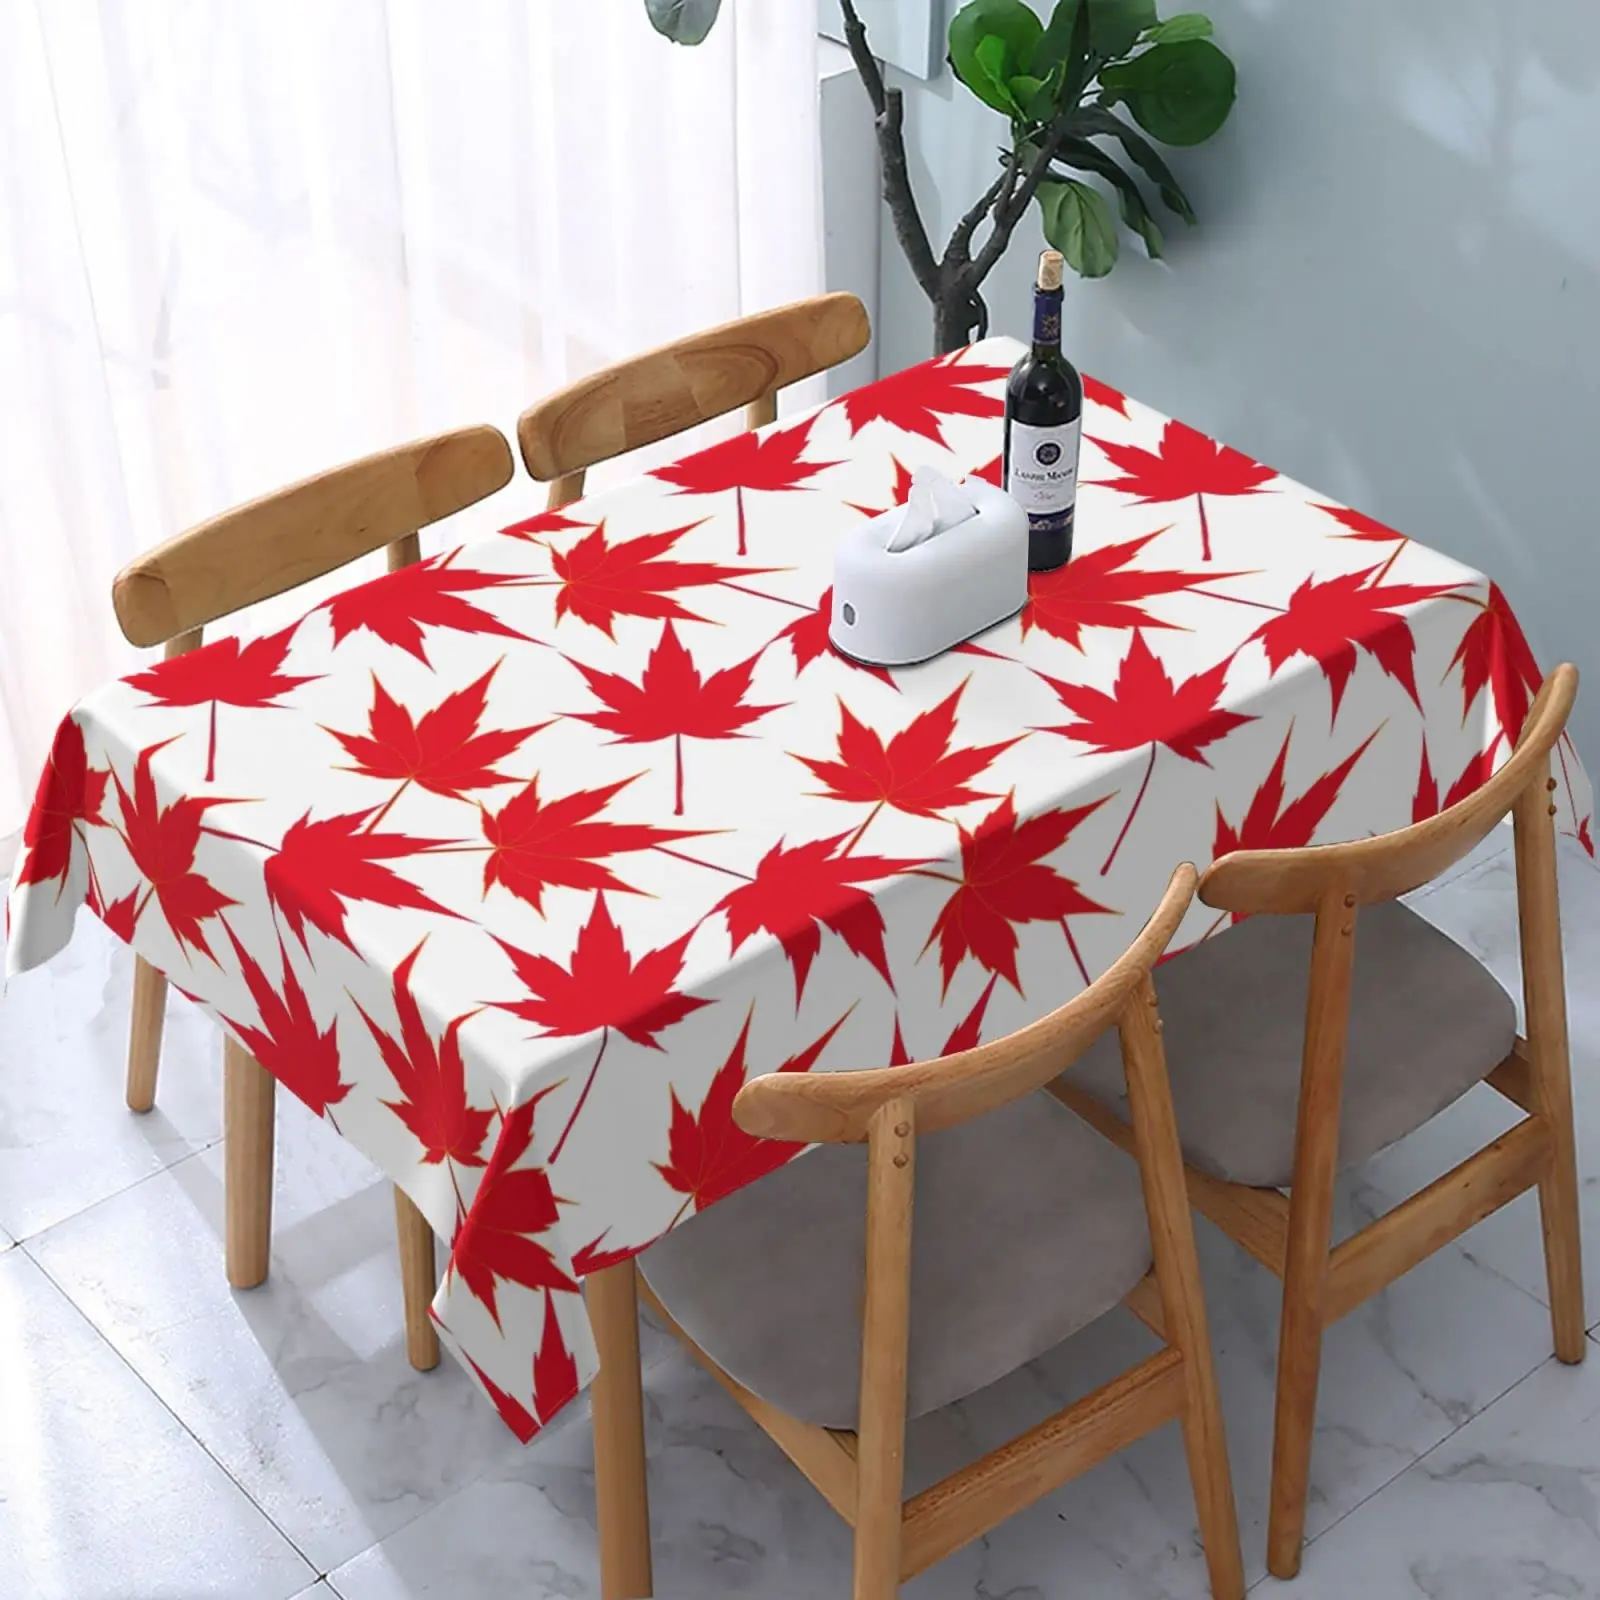 

Rectangular table waterproof table cloth Picnic table cloth 54 x 72 inch washable camping table cloth polyester